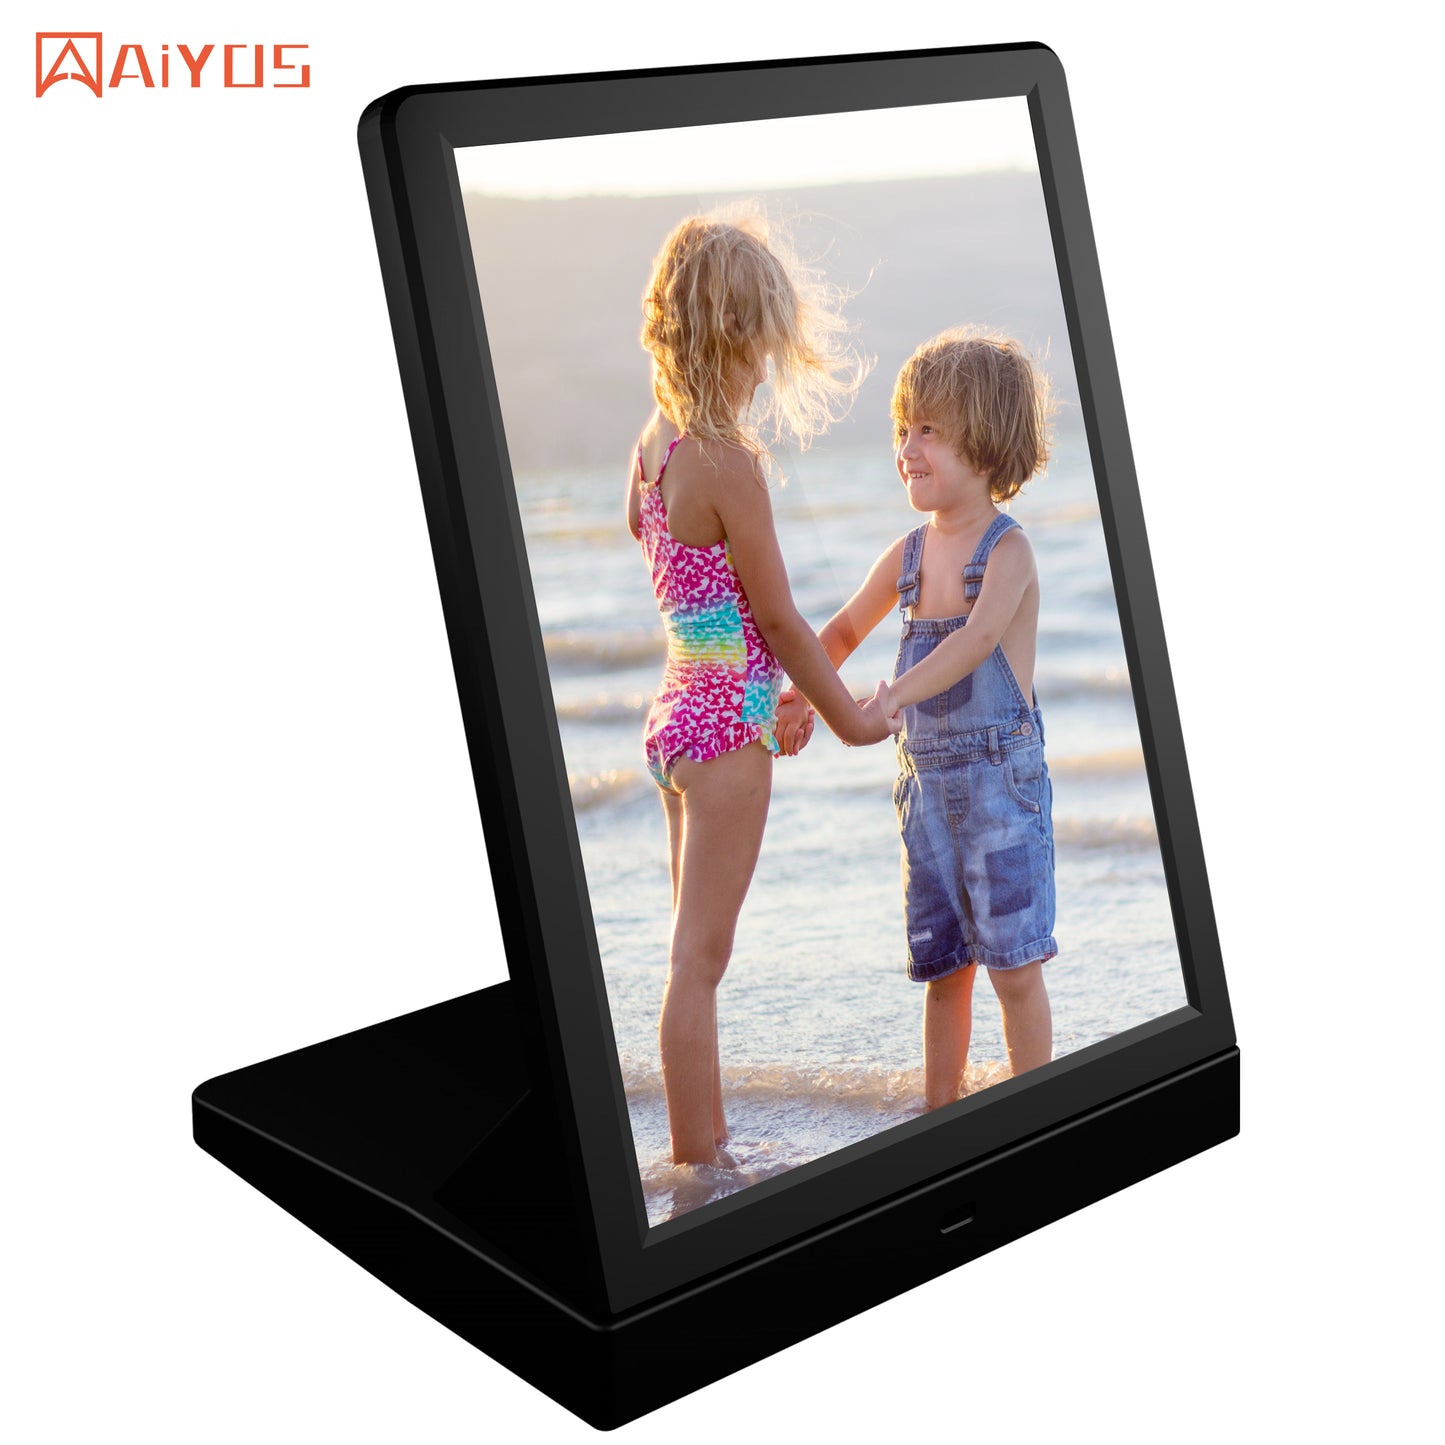 9.7" Desktop LCD Player Digital Photo Frame with Wireless Charger Video Play Android WiFi Cloud Version+Touch panel